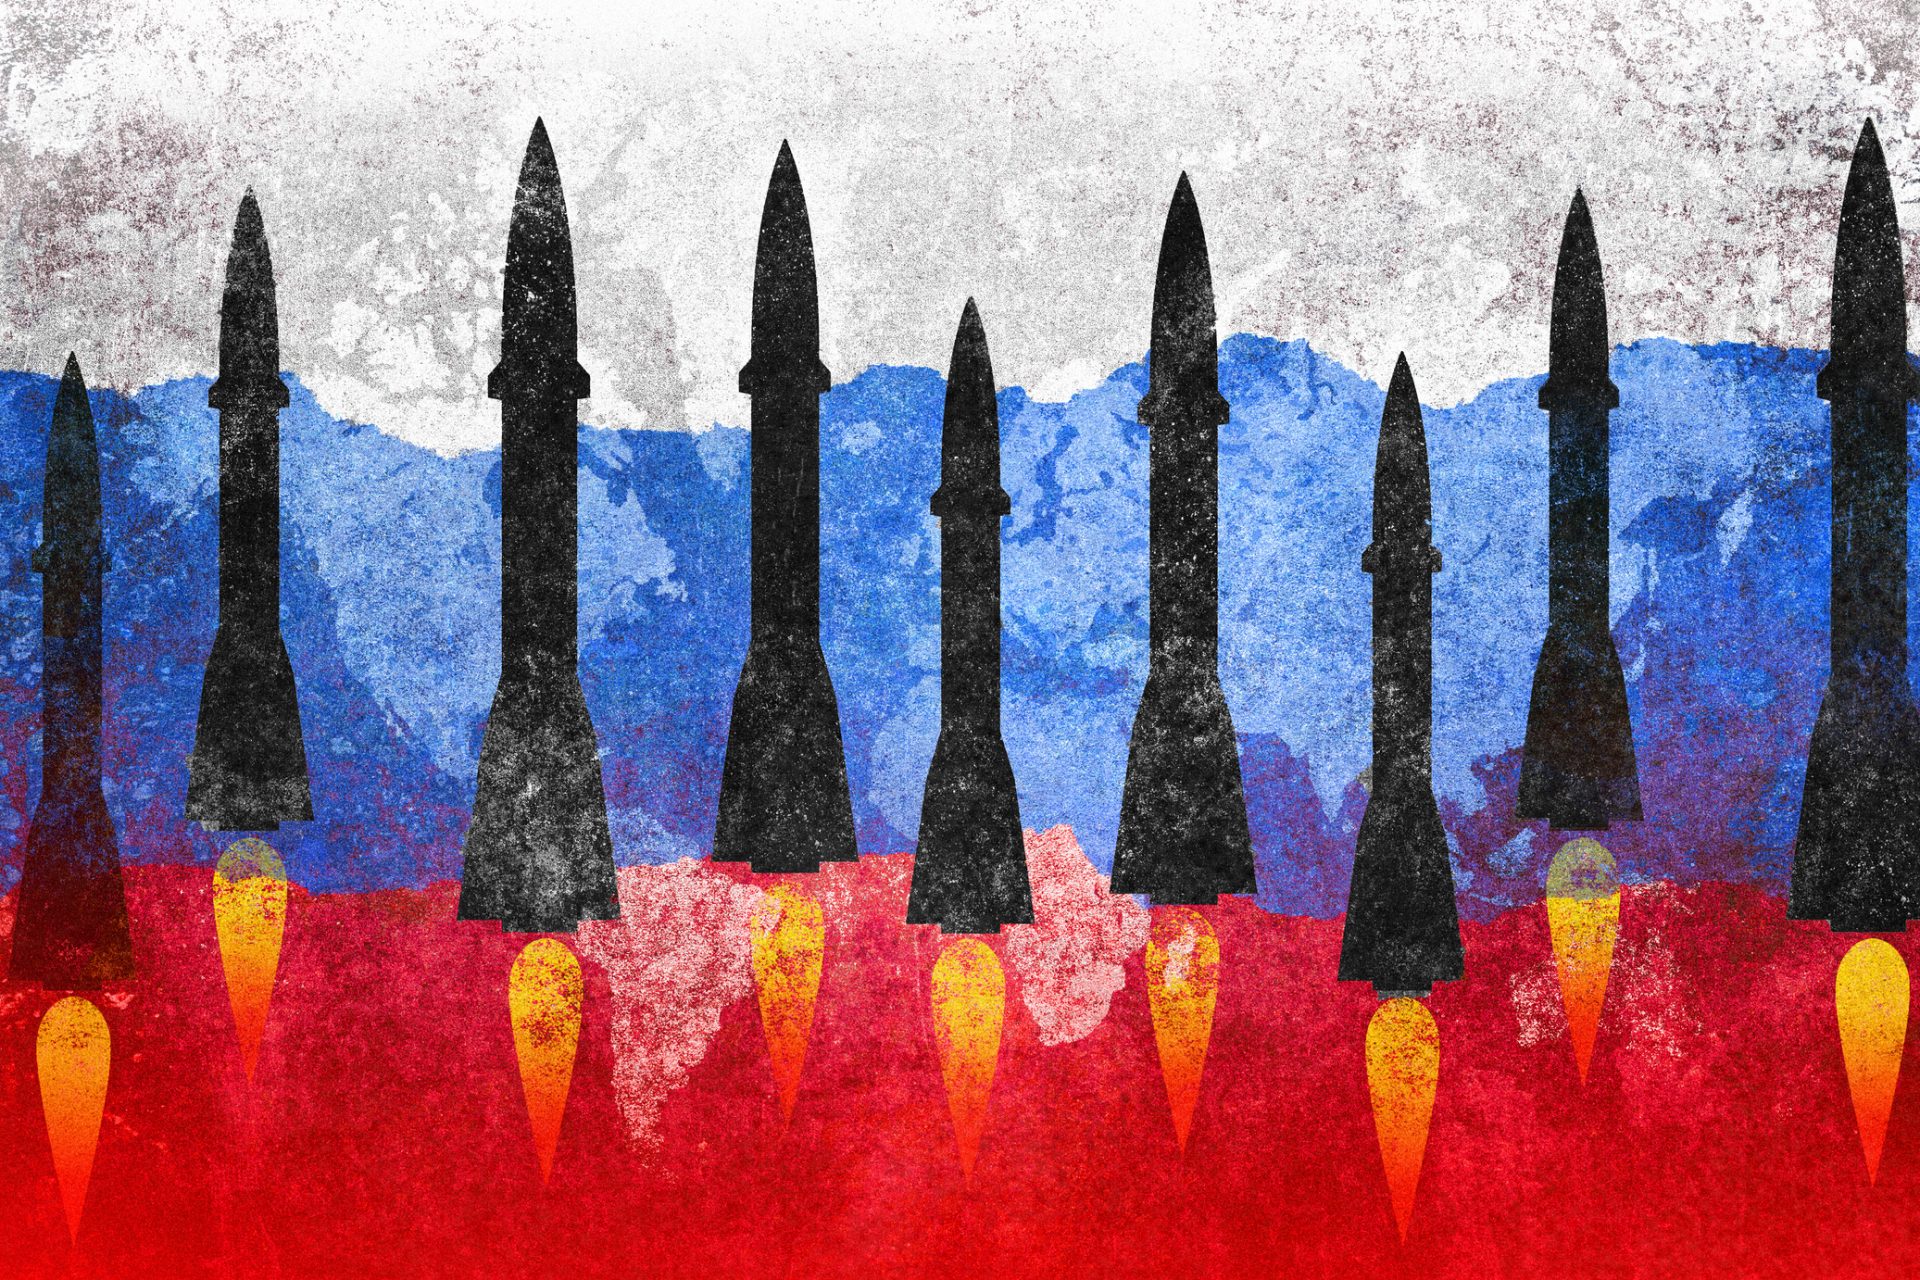 Russia is getting ready for a war with the West report claims